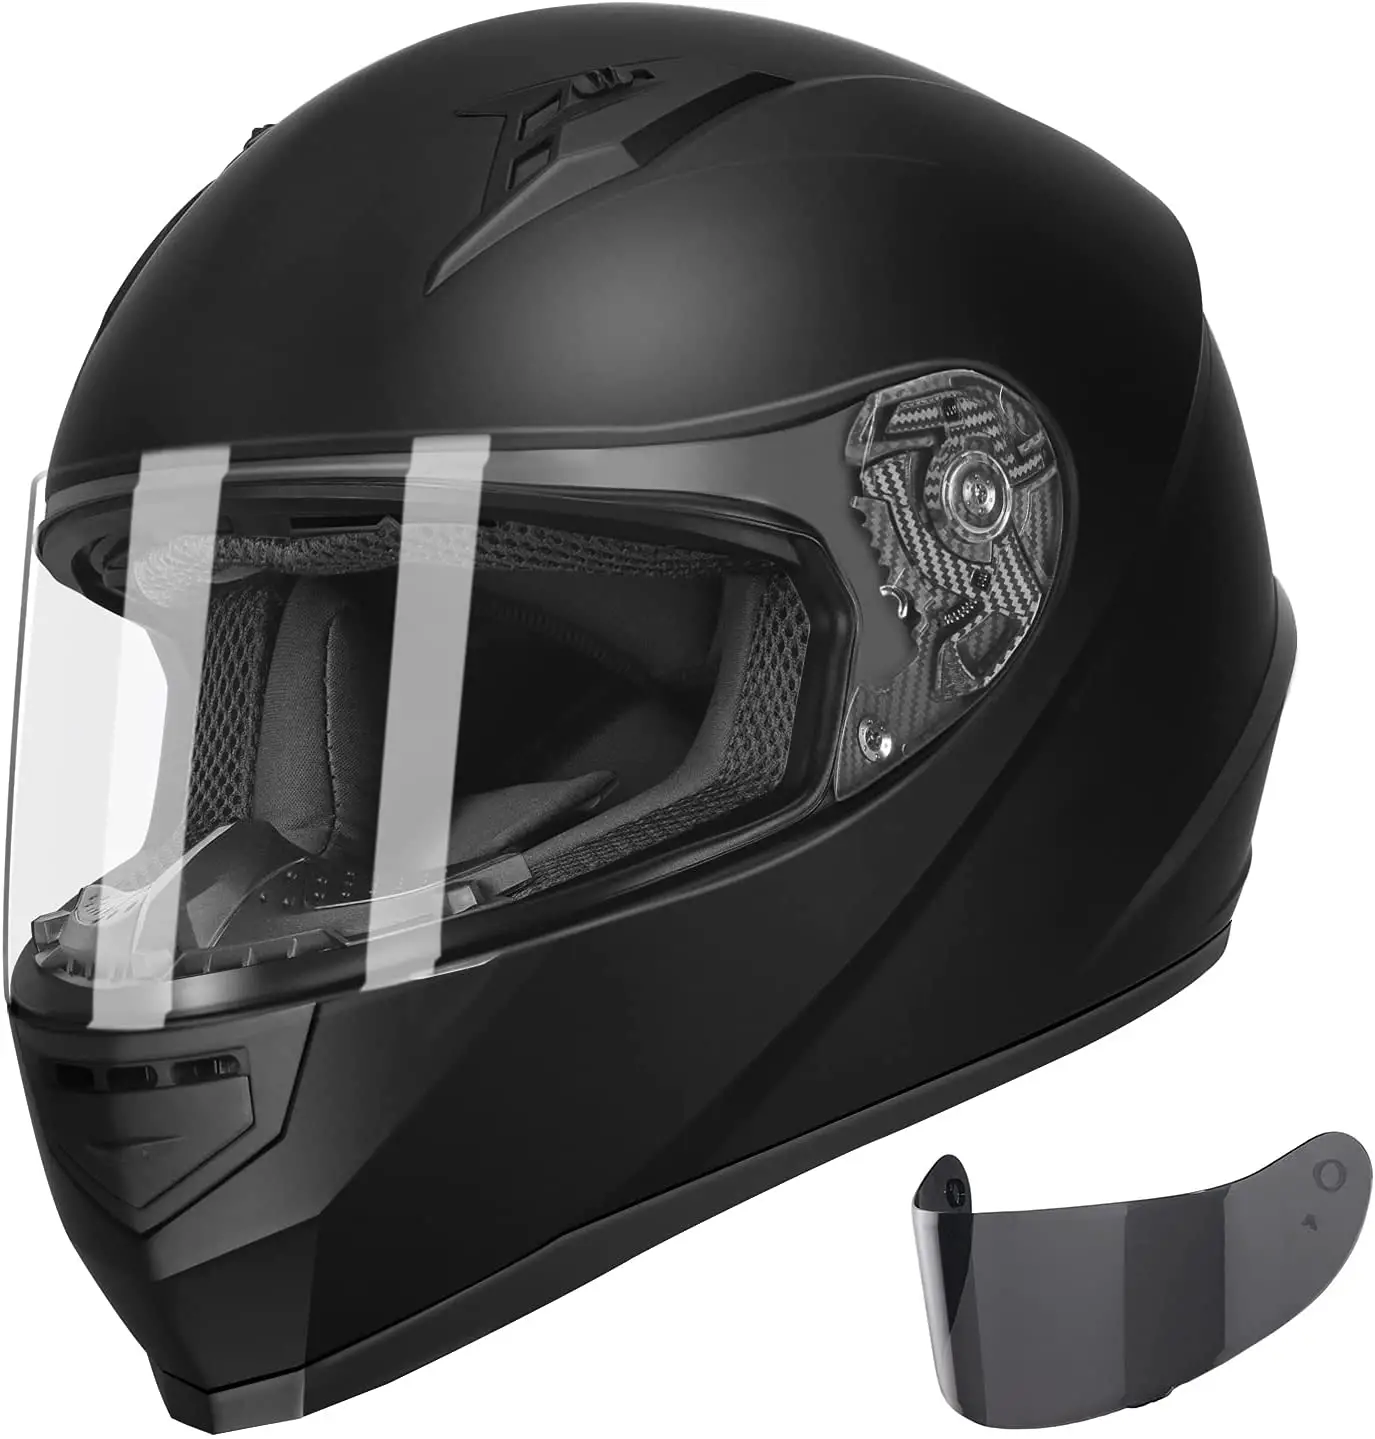 GLX GX11 Compact Lightweight Full Face Motorcycle Street Bike Helmet with Extra Tinted Visor